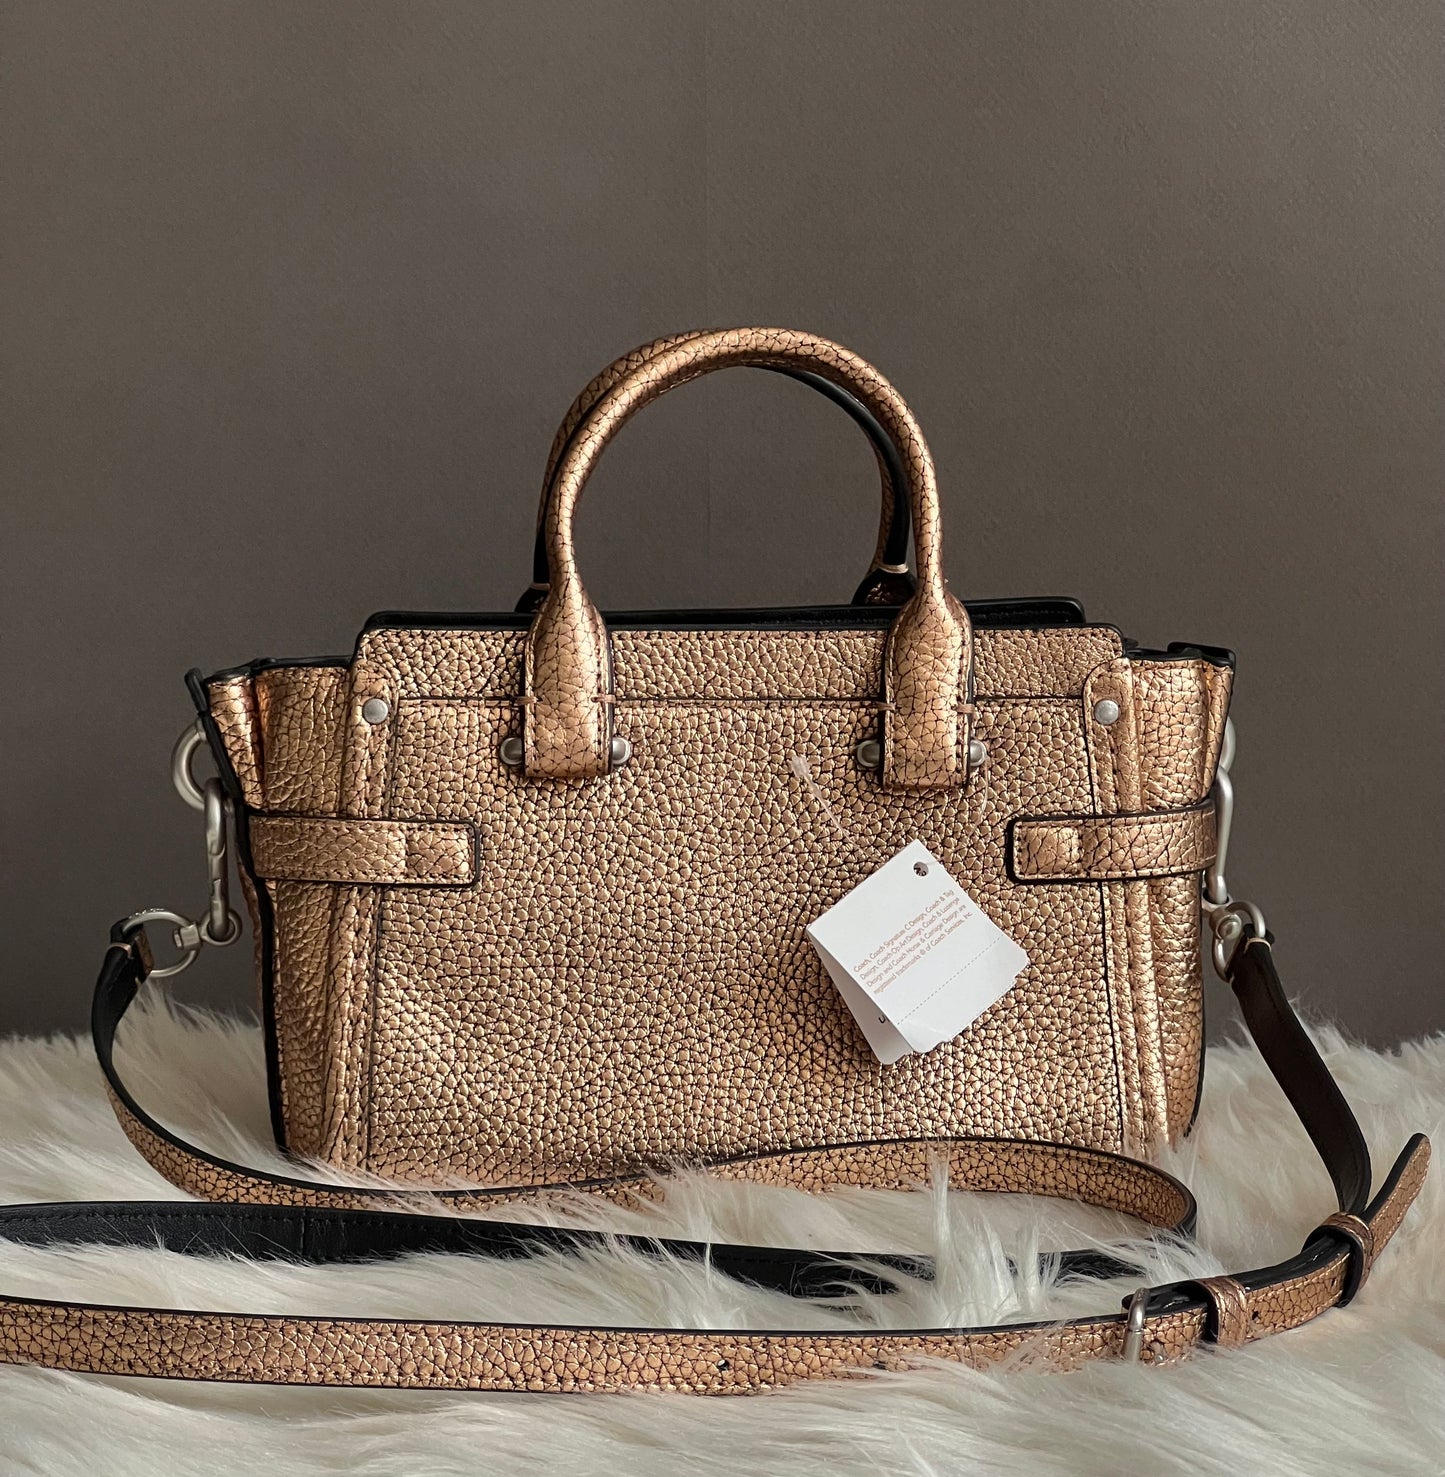 Coach Swagger 20 in Pebble Leather